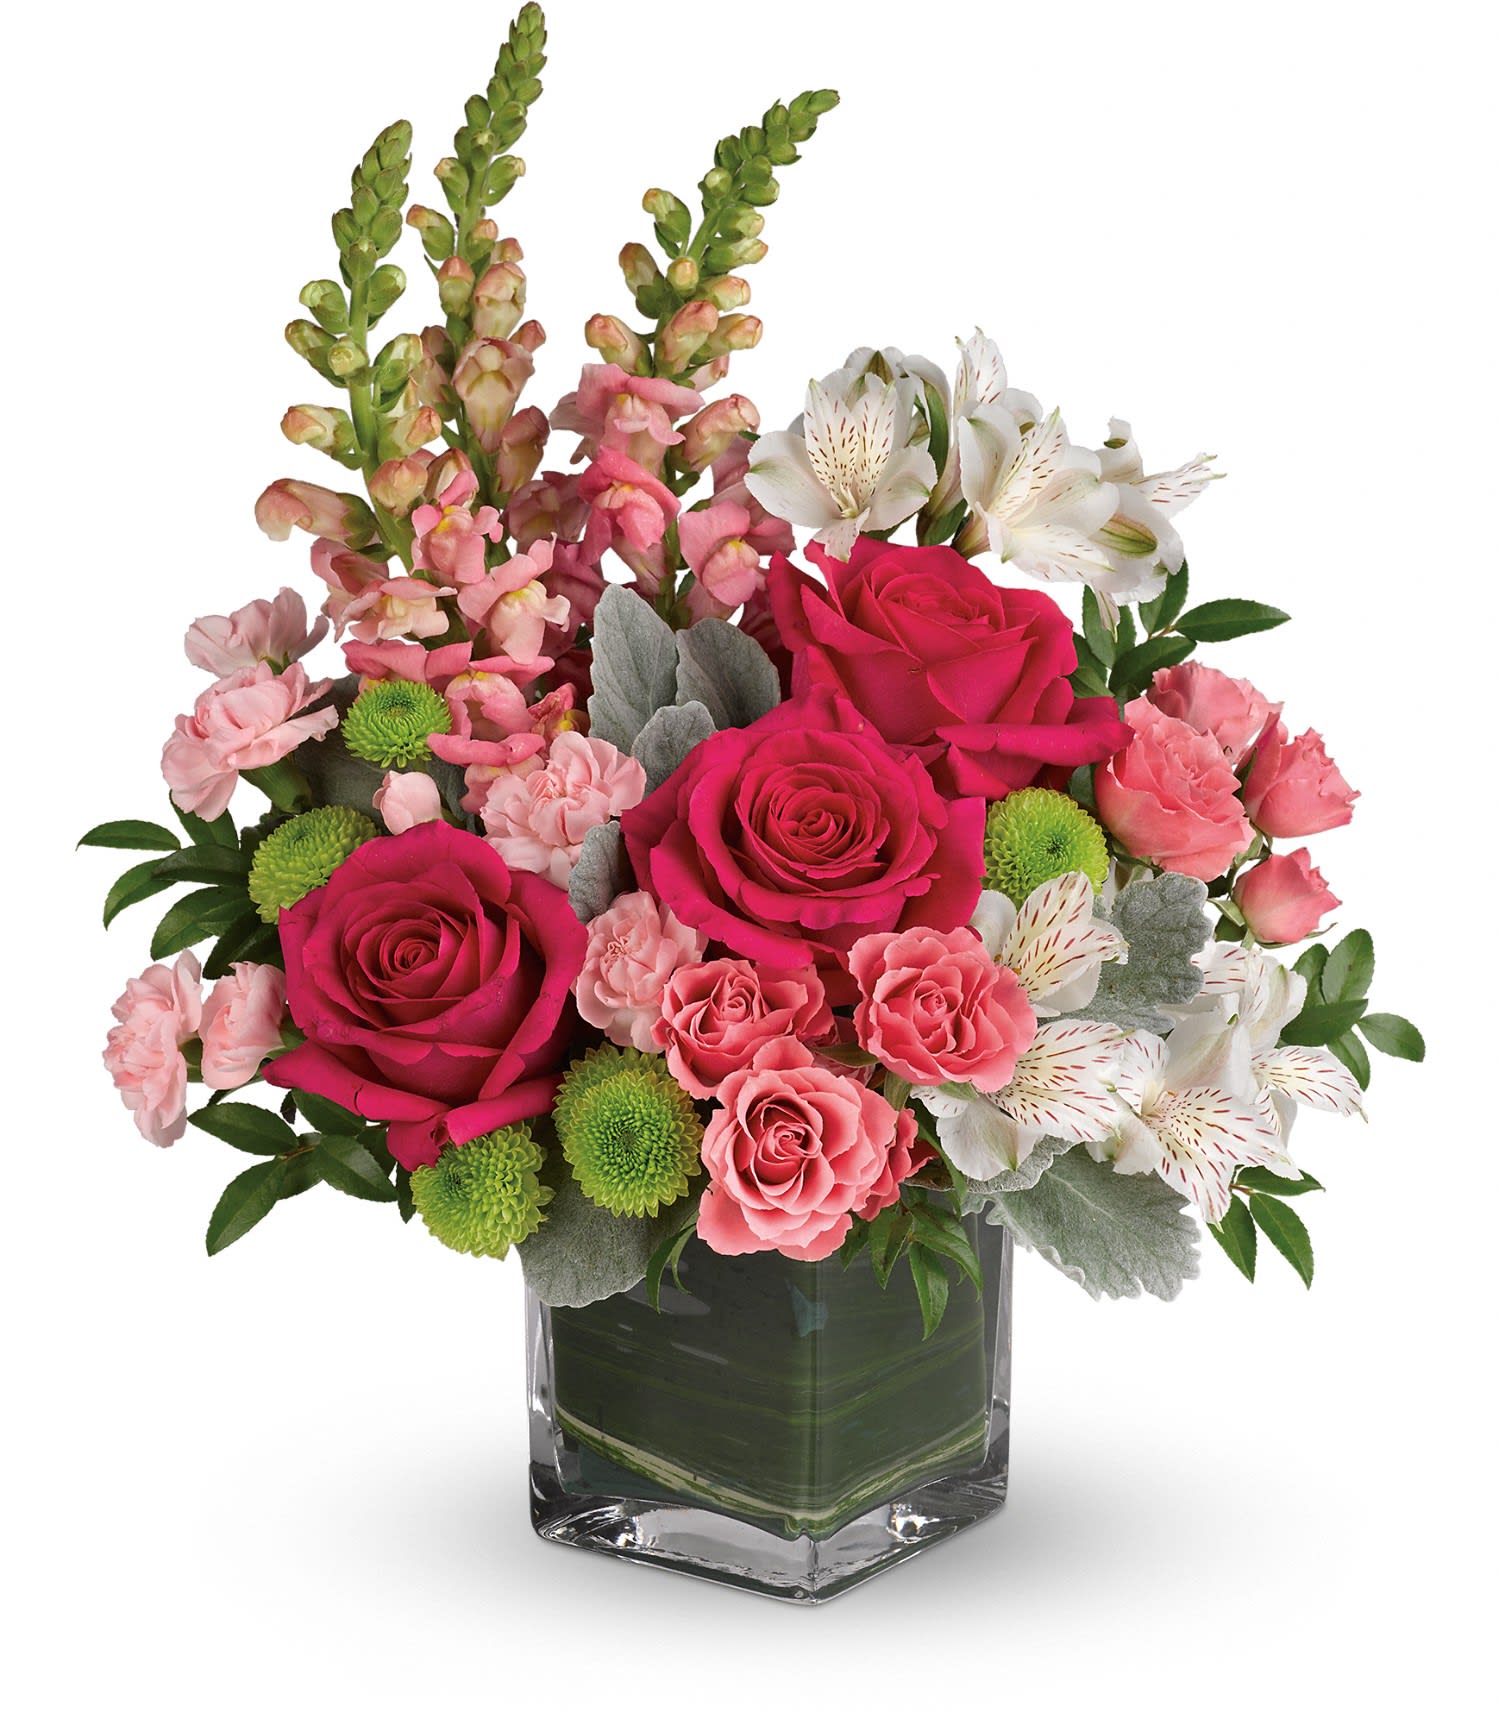 Garden Girl - Fun and feminine, this hot pink bouquet is reminiscent of a spring garden party with friends! Stunning roses, delicate alstroemeria and dramatic snapdragons are hand-delivered in a classic cube vase lined with a green leaf - a surprise gift that'll touch her heart, no matter the occasion.  Hot pink roses, pink spray roses, white alstroemeria, pink miniature carnations, green button spray chrysanthemums and pink snapdragons are arranged with dusty miller, huckleberry and variegated aspidistra leaf. Delivered in a clear cube vase. Approximately 14 1/2&quot; W x 17&quot; H